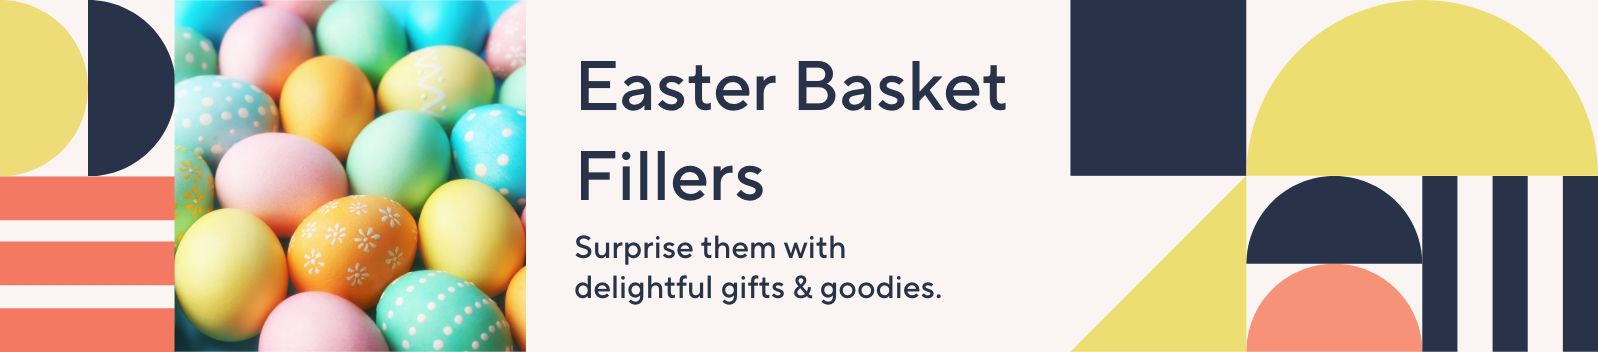 Easter Basket Fillers. Surprise them with delightful gifts & goodies.